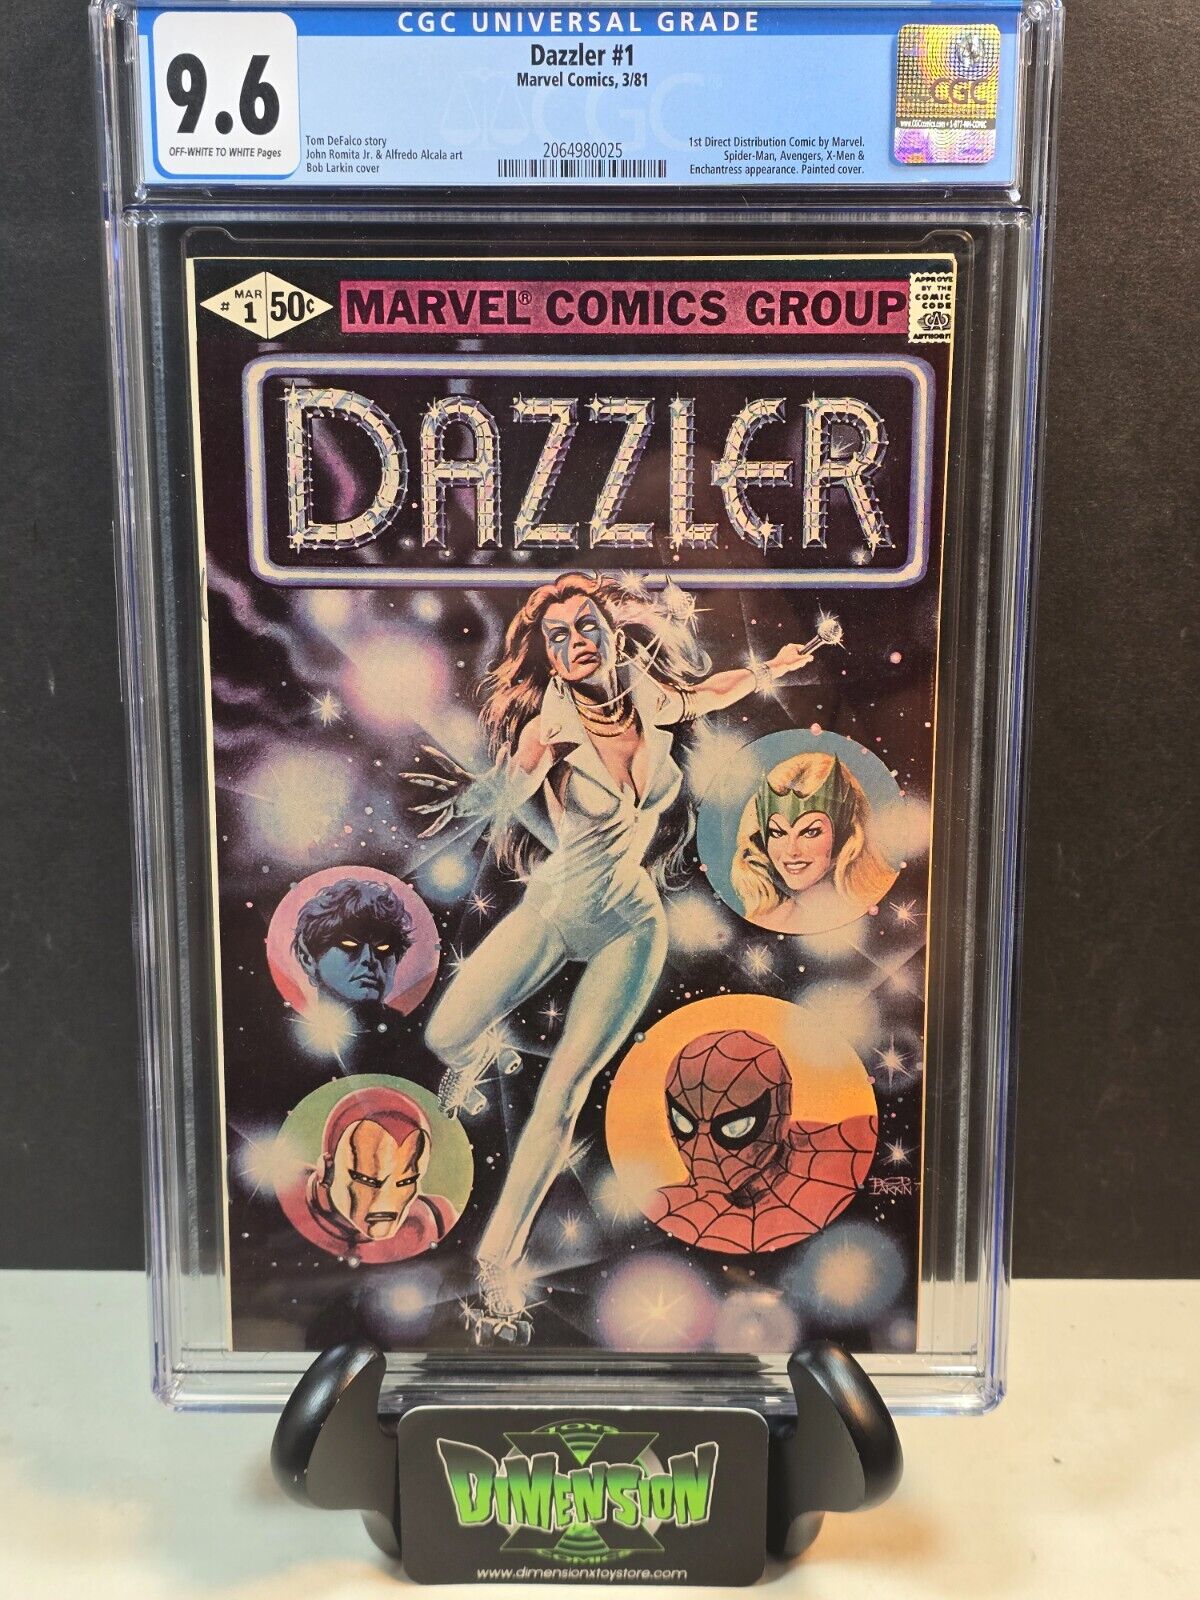 DAZZLER #1 💥 CGC 9.6 OFF-WHITE TO WHITE PAGES💥 SPIDER-MAN AVENGERS X-MEN 1981